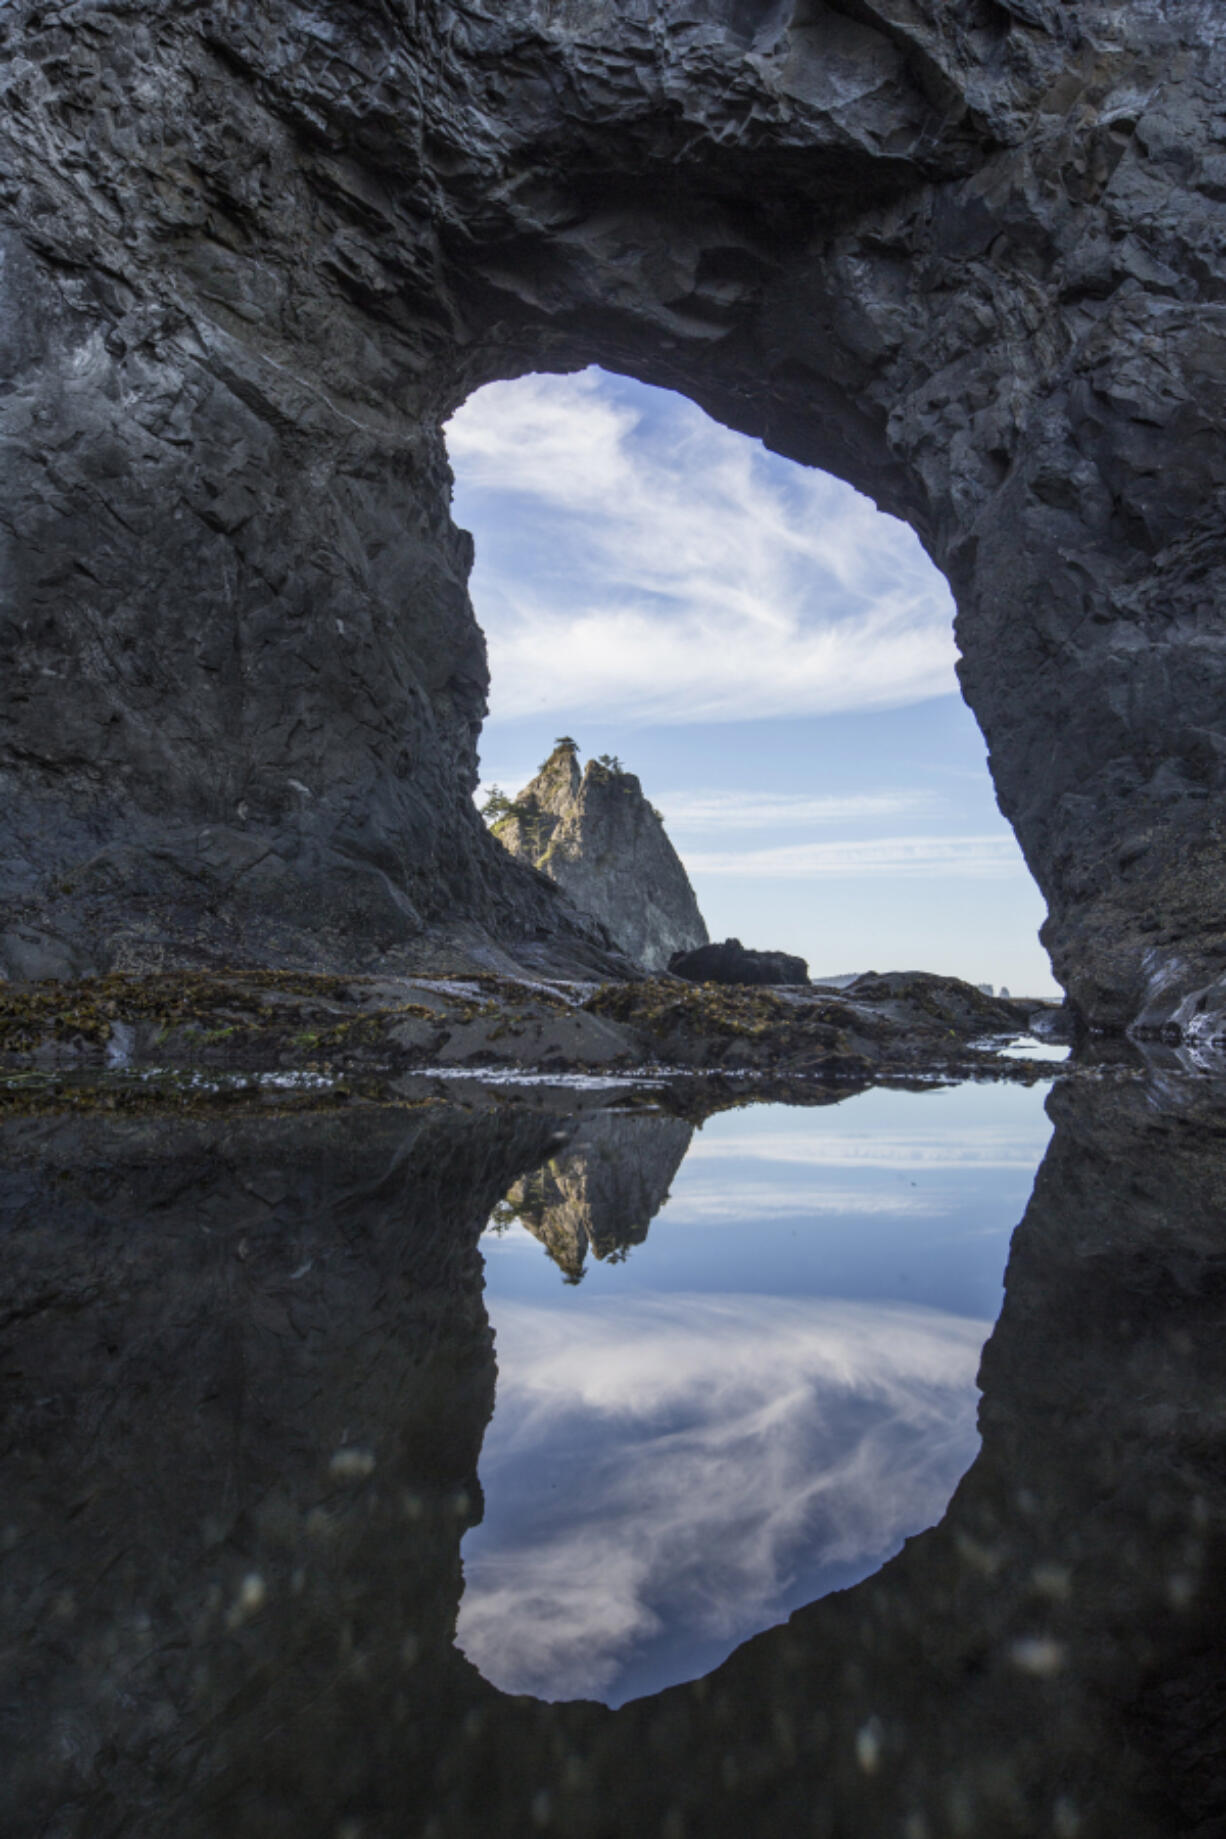 Hole-in-the-Wall, a popular destination at Olympic National Park&rsquo;s Rialto Beach, reflected in a tide pool in 2014.